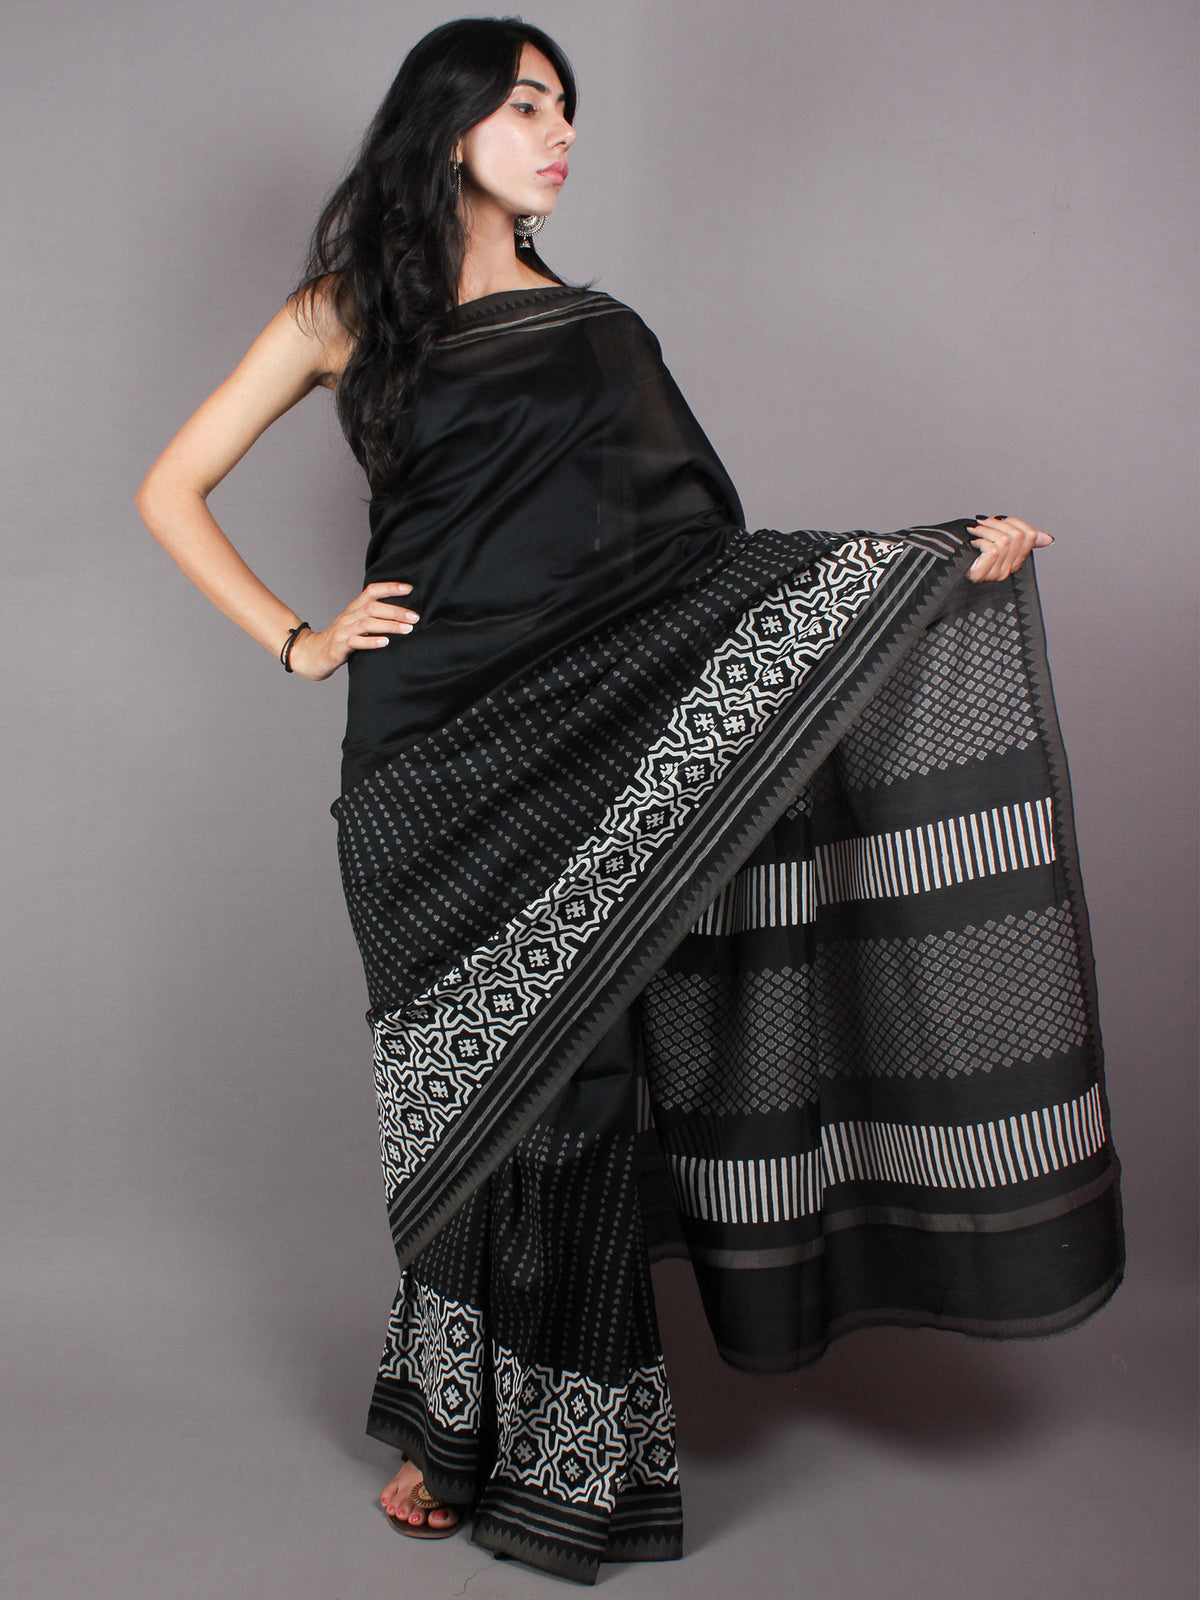 Black White Grey Hand Block Printed in Natural Vegetable Colors Chanderi Saree With Geecha Border - S03170382